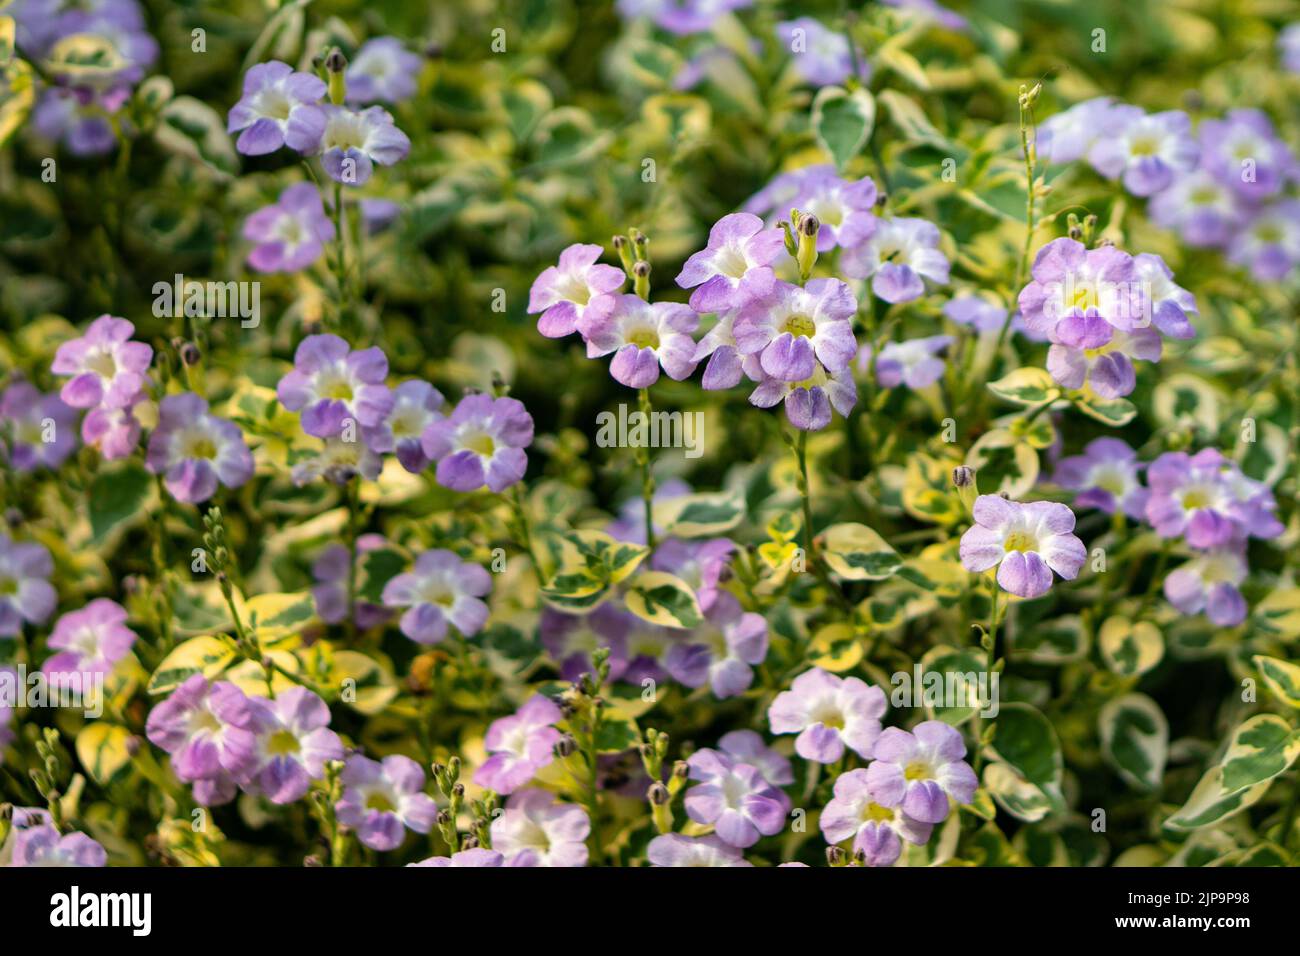 Field of small purple flowers that bloom in early winter Stock Photo